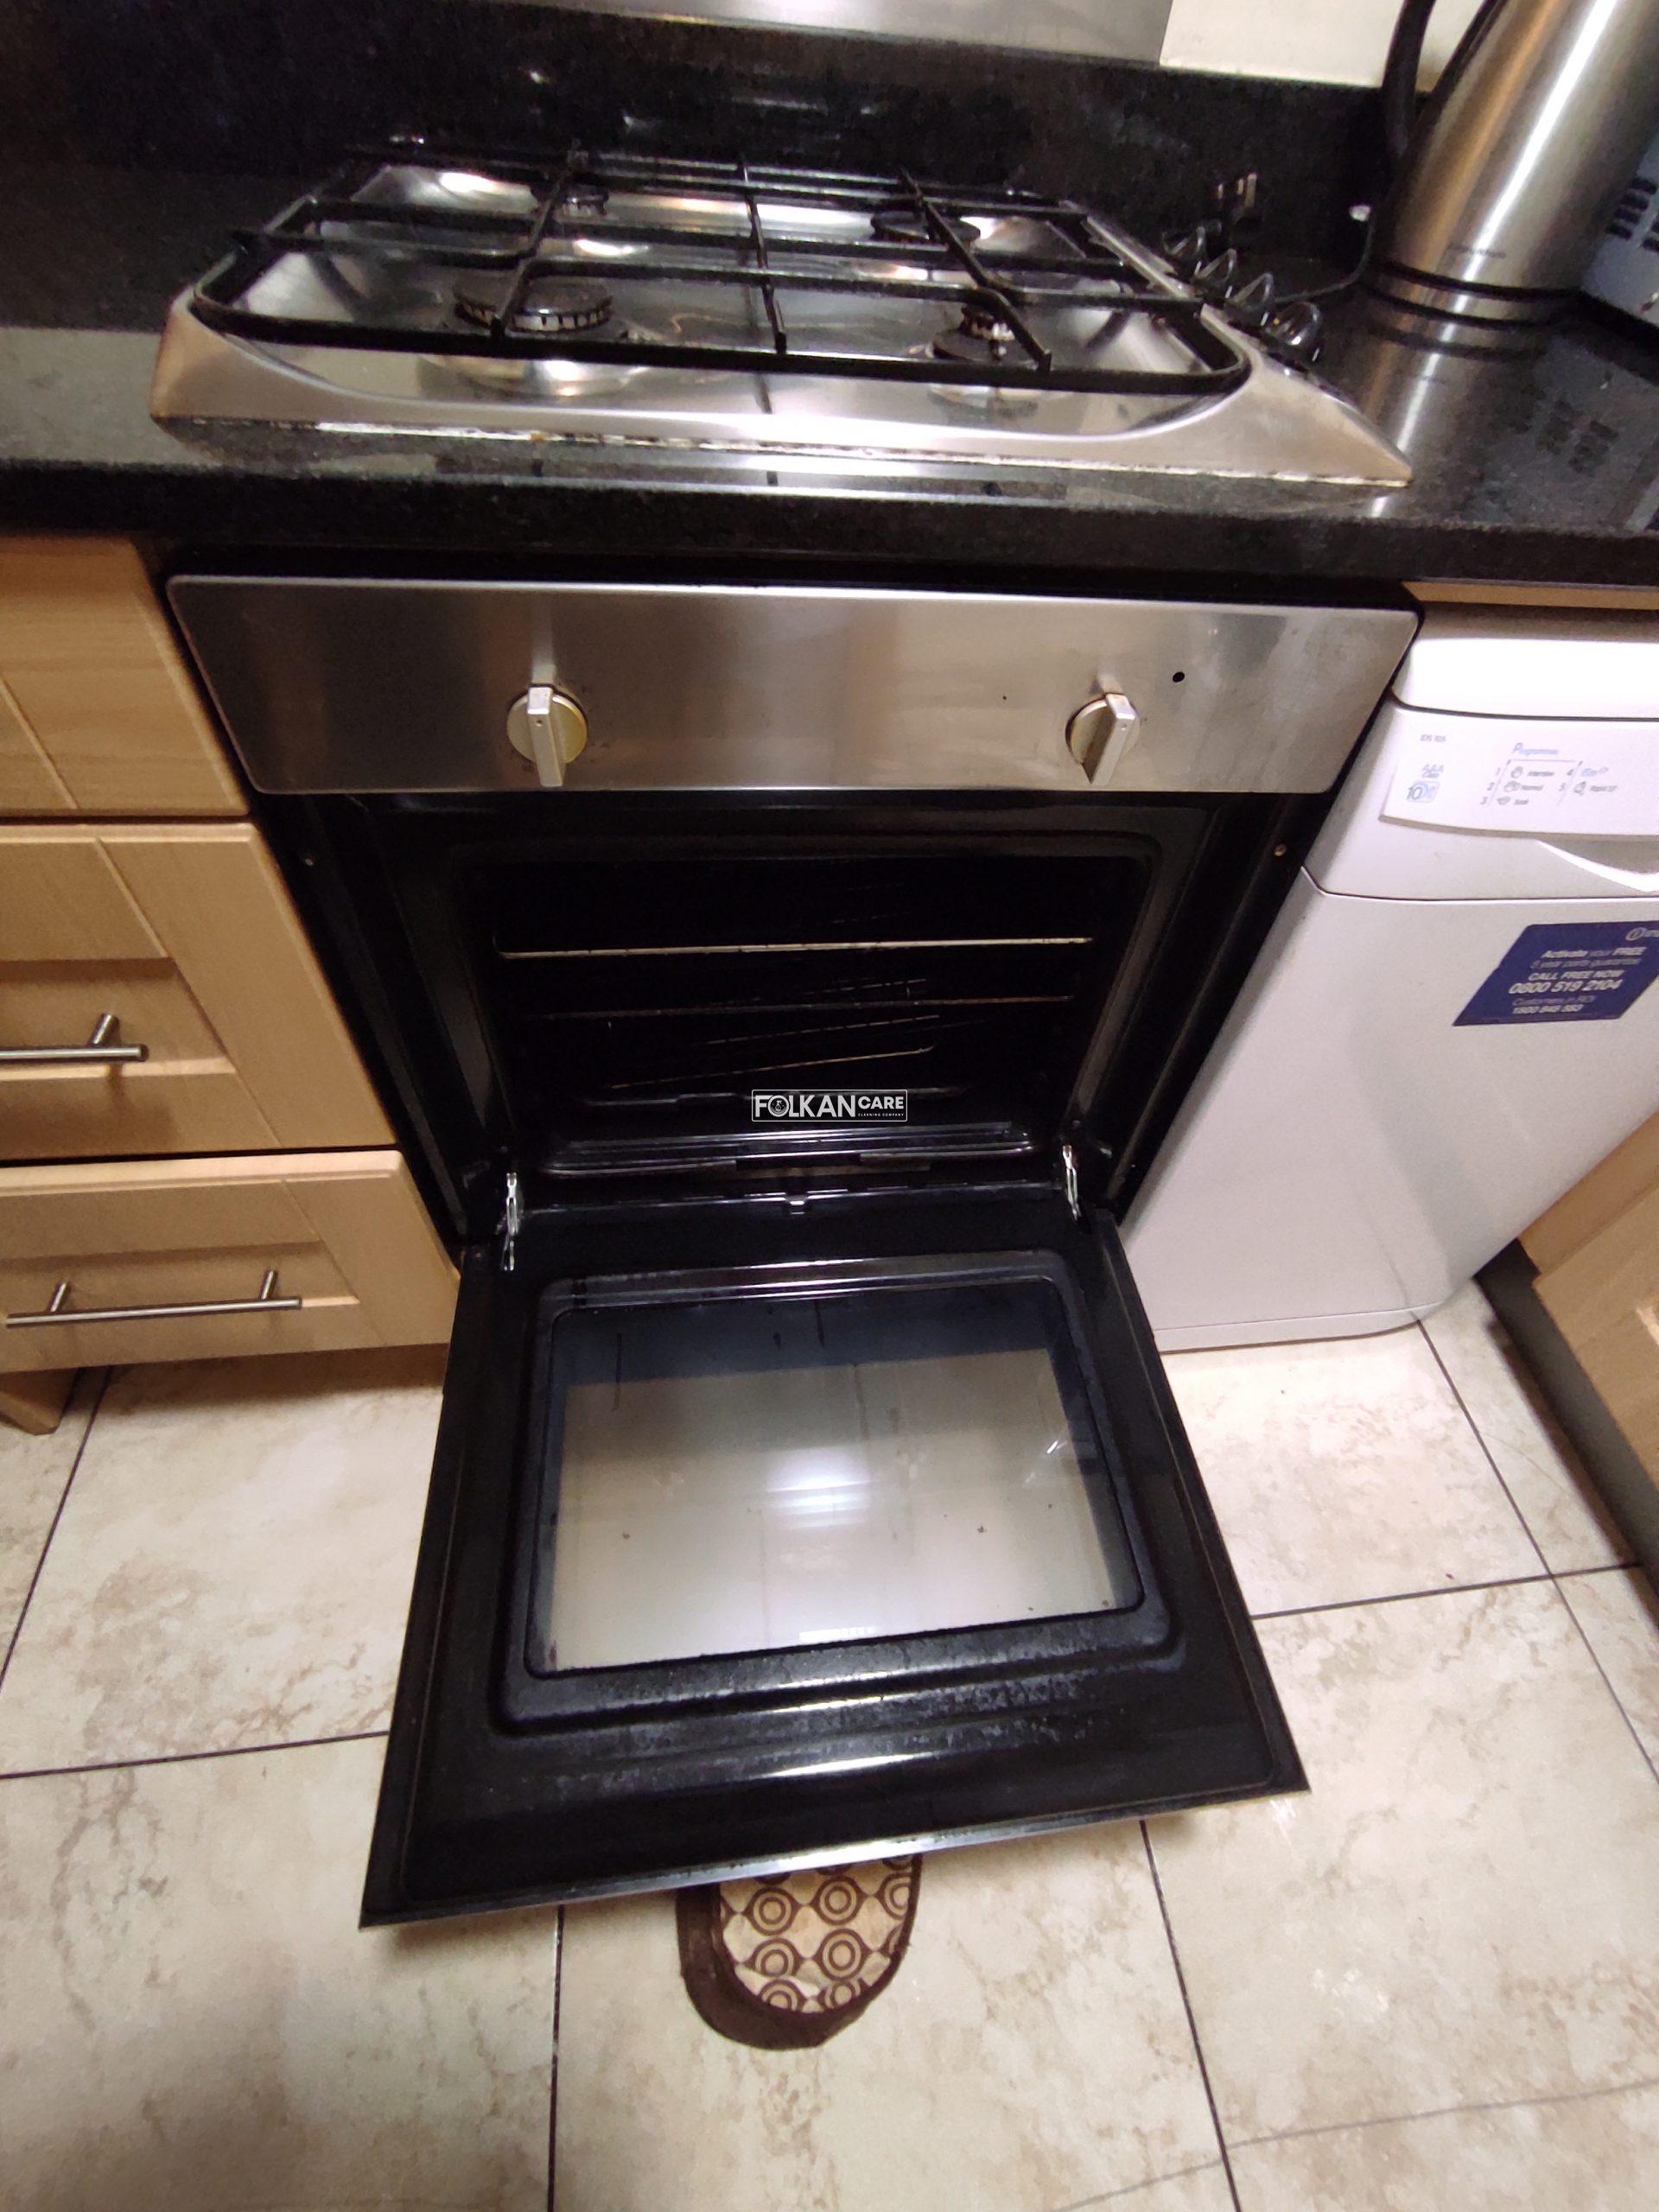 Cleaning Expert Shares: How To Clean The Oven Quickly Everyone Knows That Oven Cleaning Is A Messy And Hectic Job. However, It Is Important To Tackle That Mess Nevertheless. A Dirty Over Doesn’t Only Look Bad, But There Are Various Other Reasons As Well To Keep It Clean.